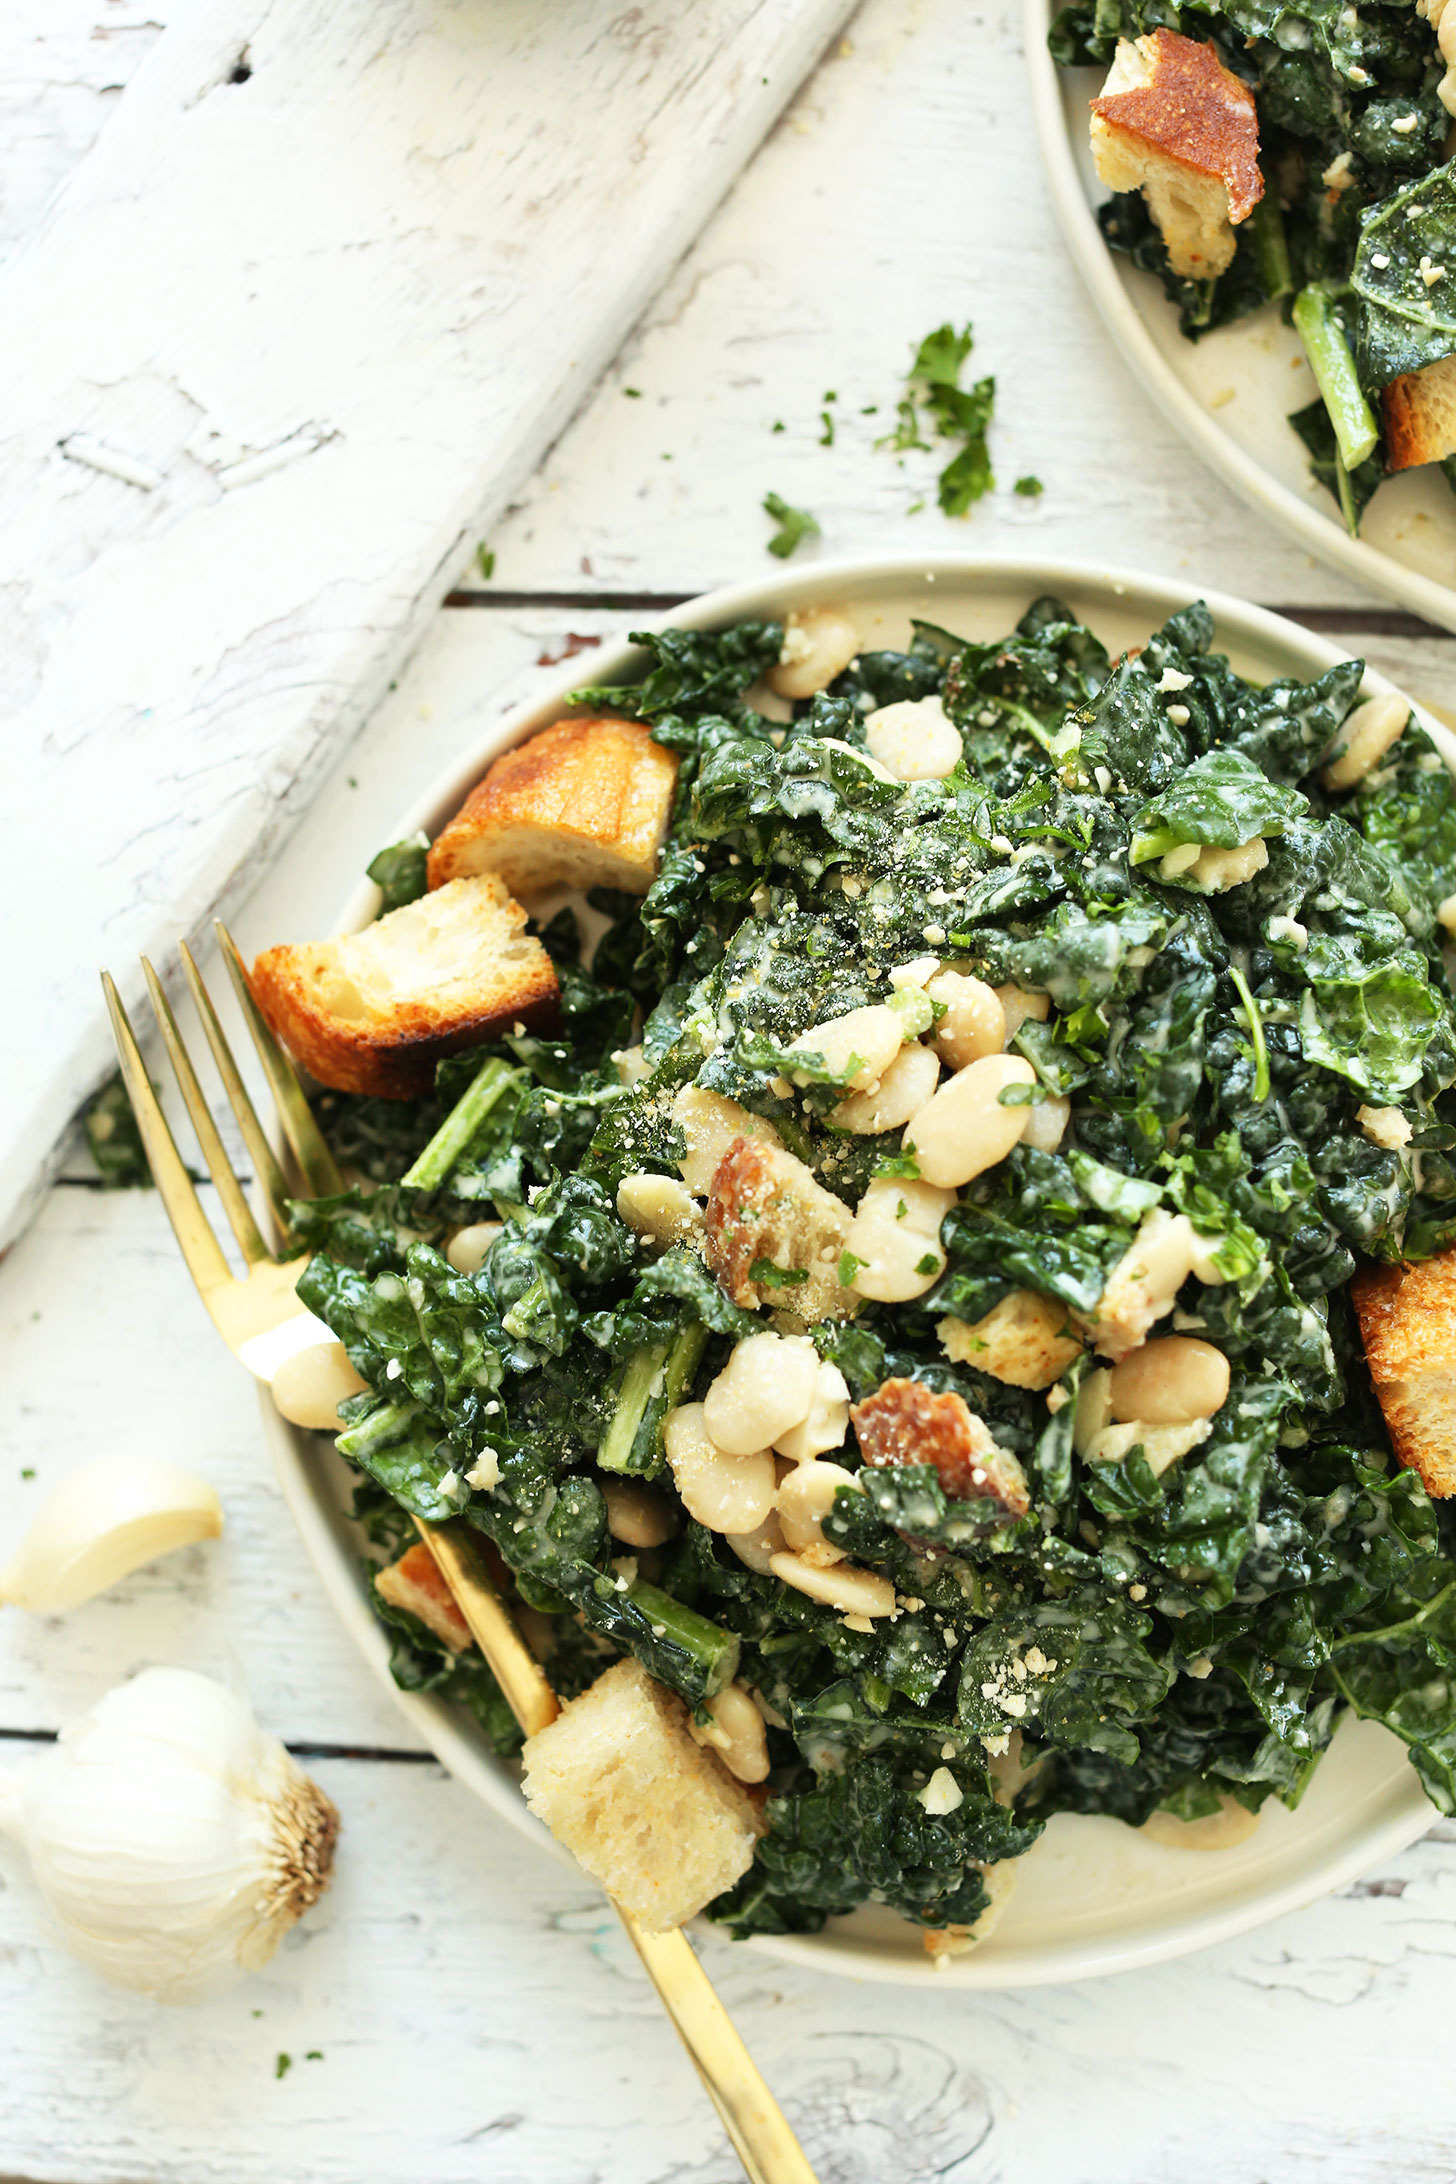 Big plate of a Lemony Garlic Kale Salad with Butter Beans and Garlic Croutons